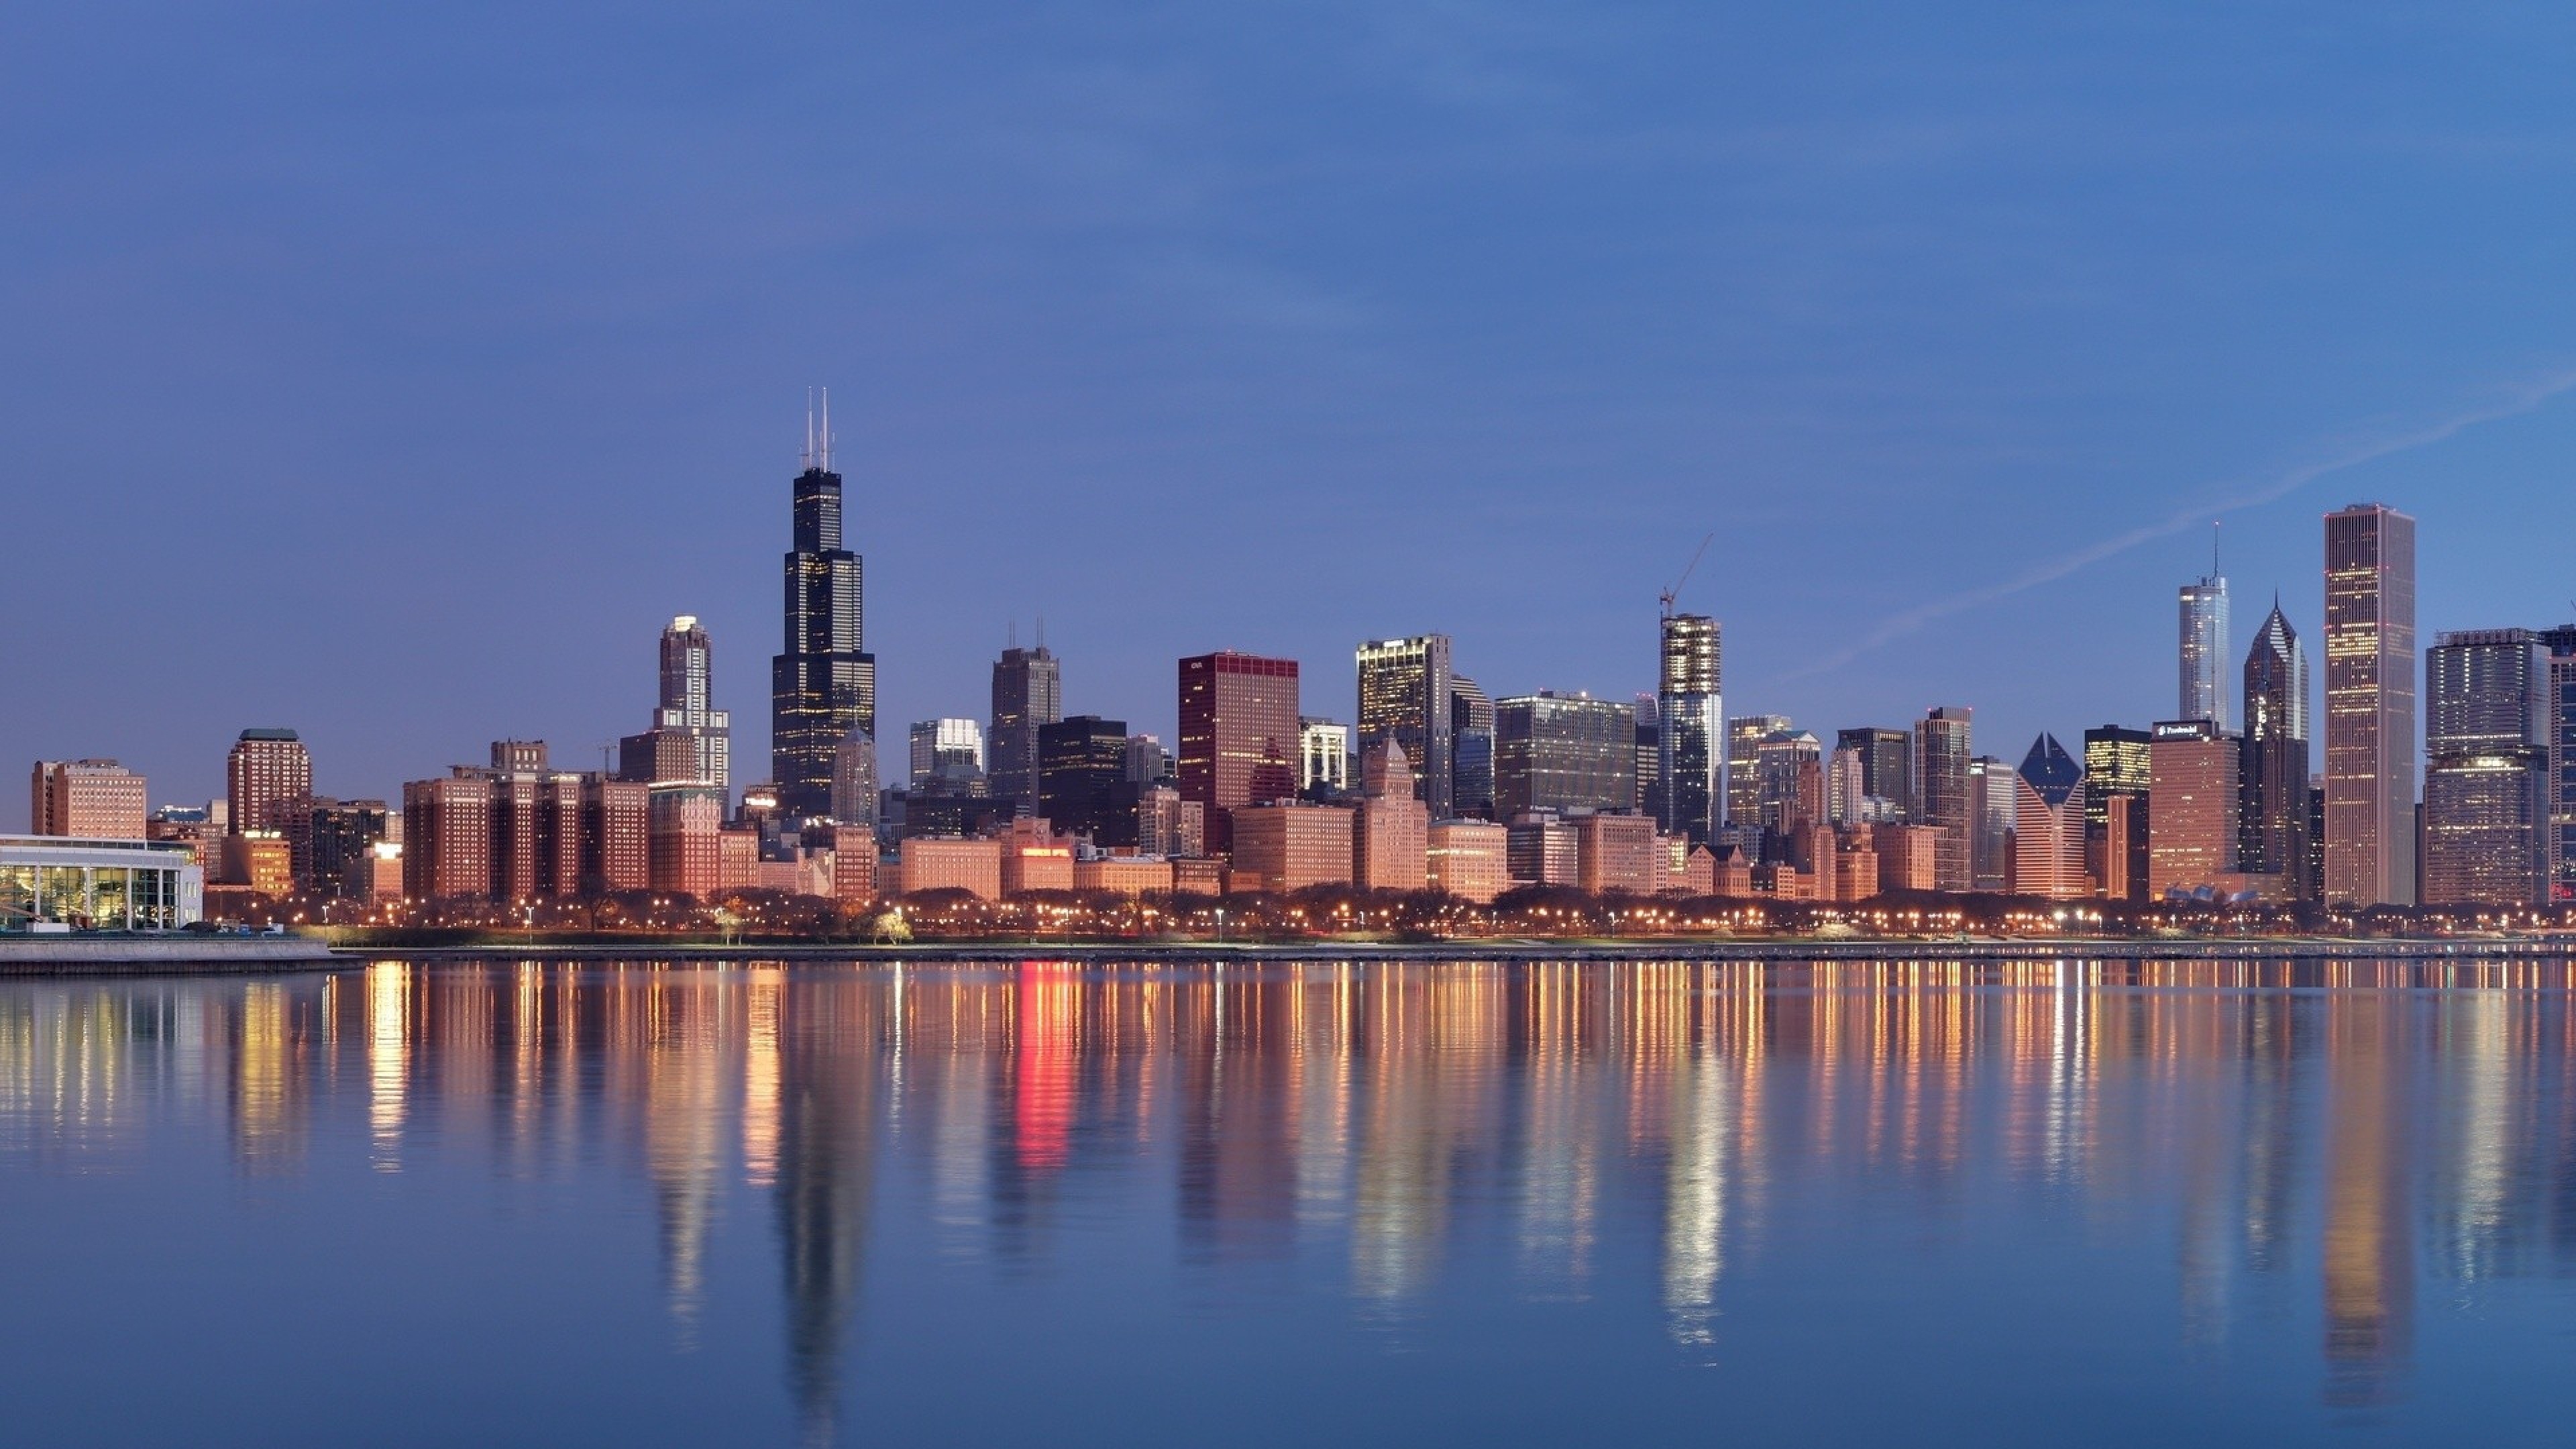 Chicago Panorama Beach Building Wallpaper Background 4k Ultra HD